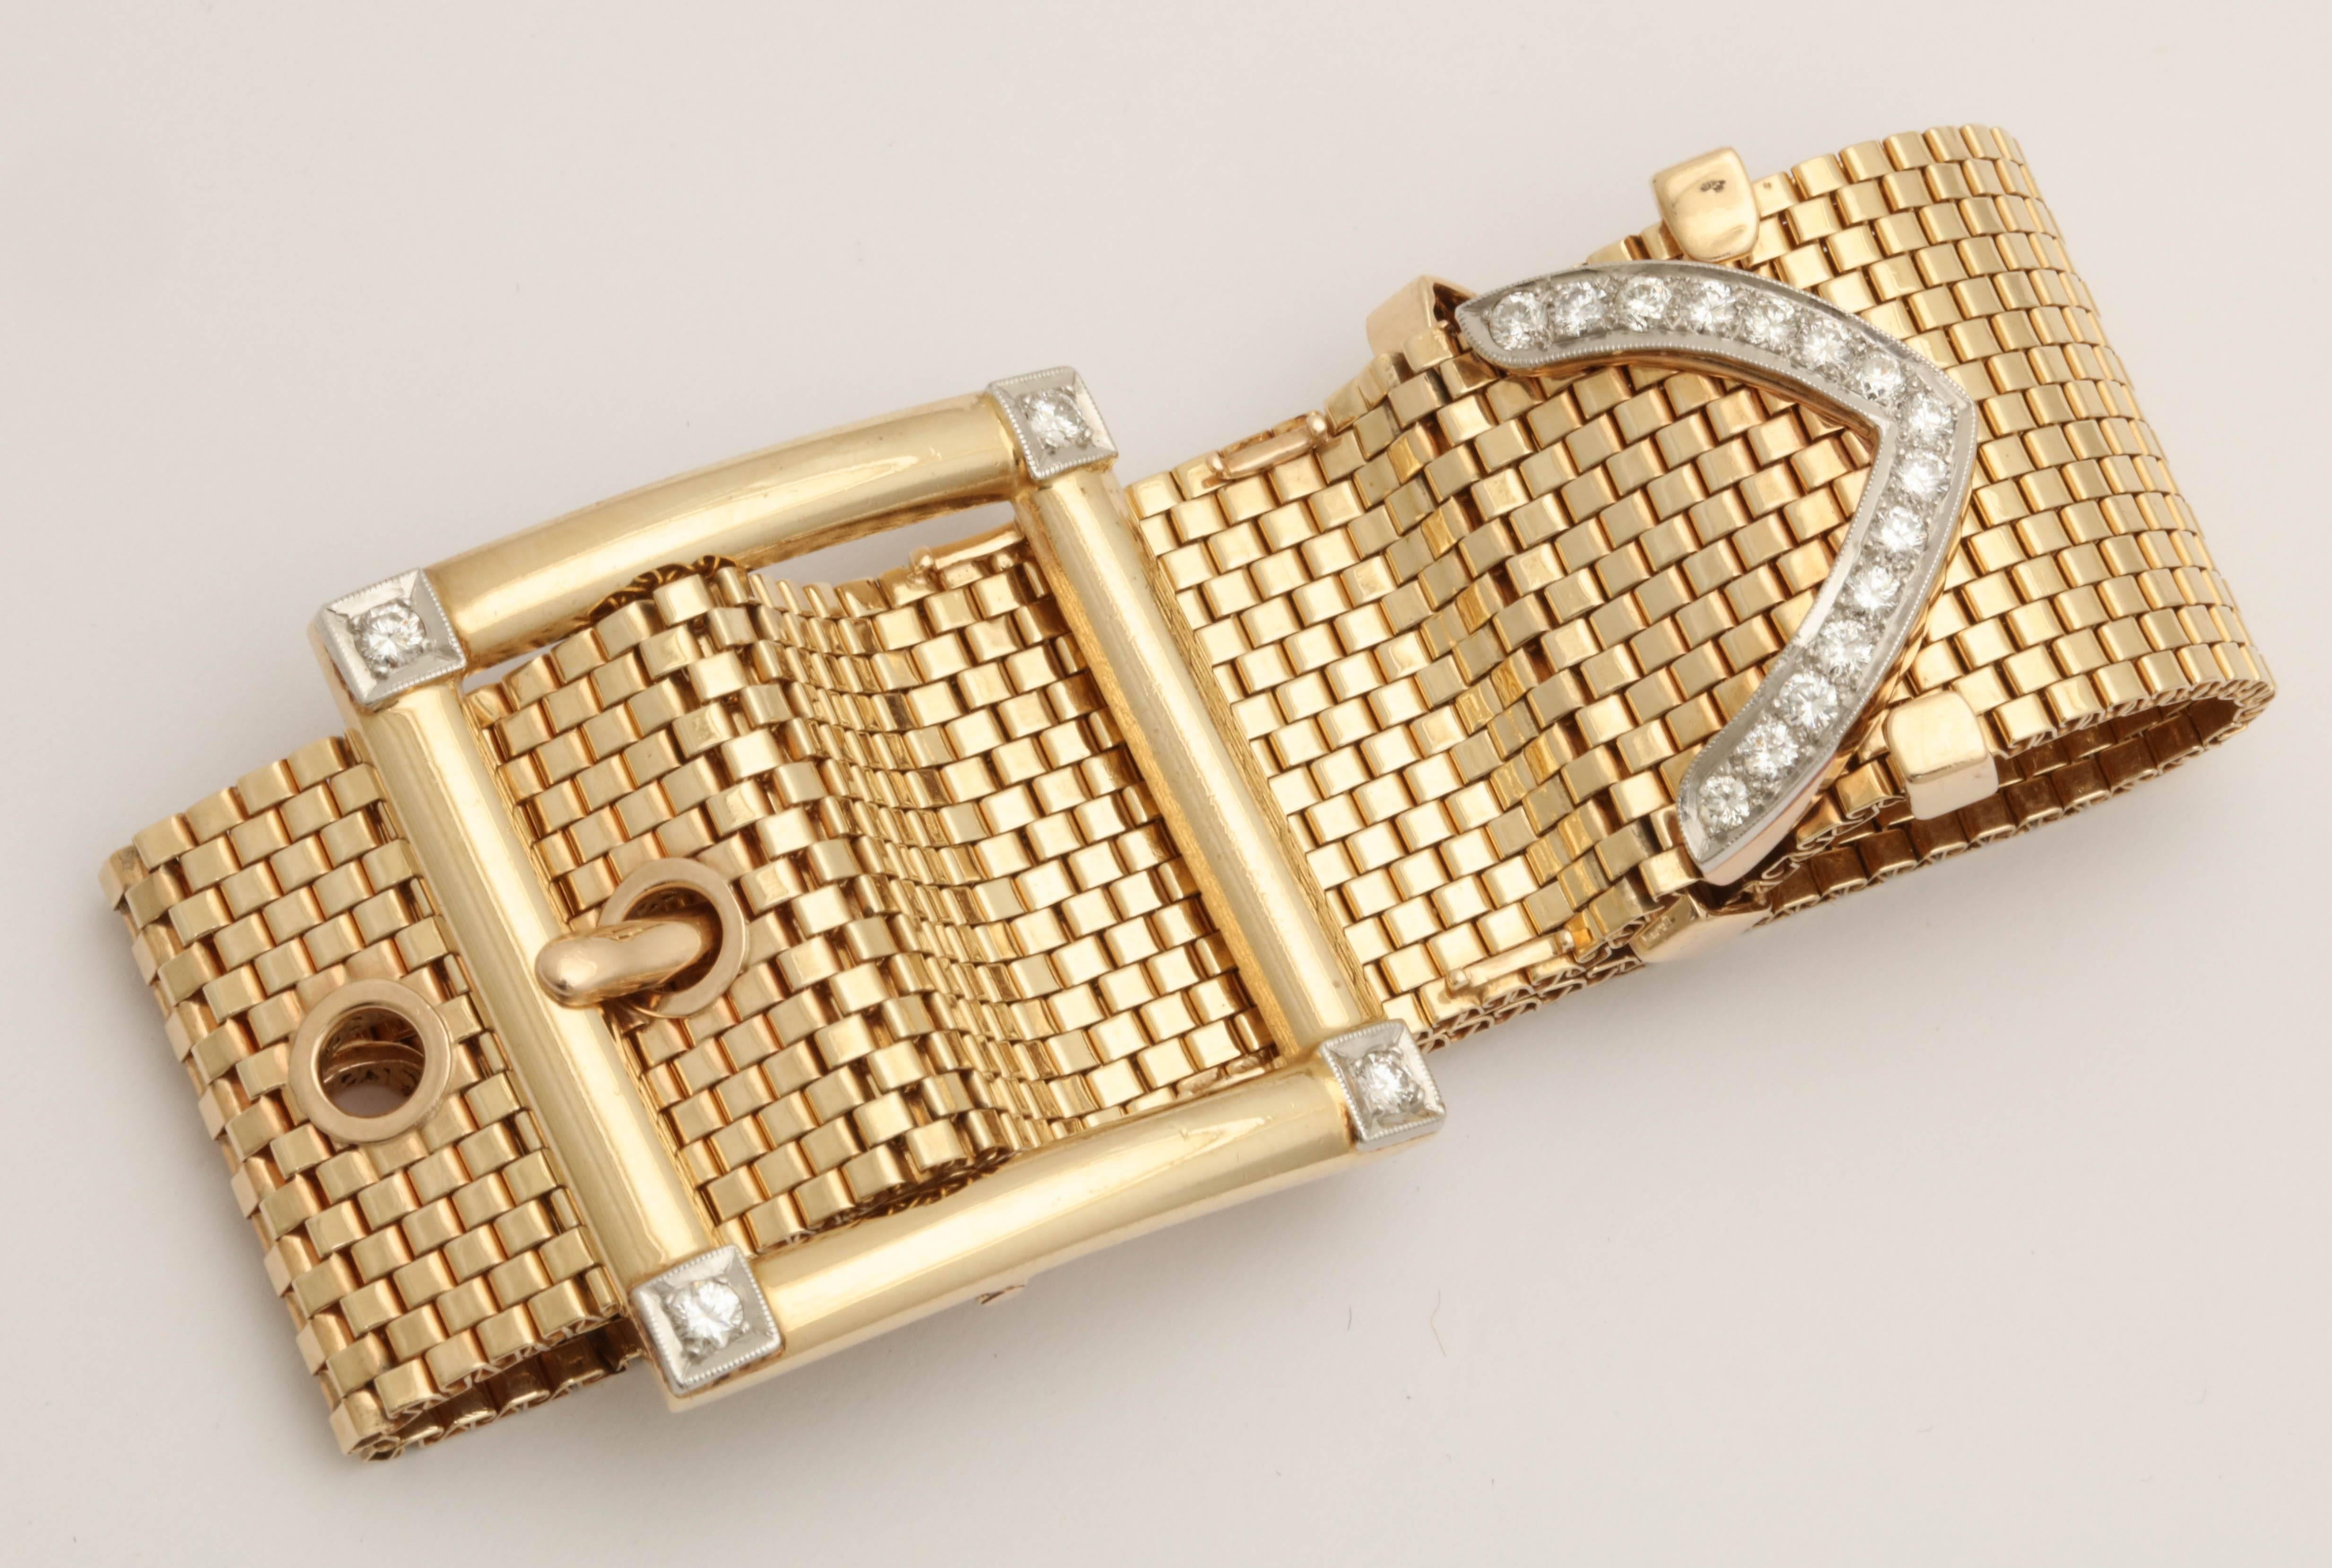 One Ladies 14kt Gold Brick Mesh Flexible Bracelet In Shape Of a Belt Buckle. With a High Polish Gold Buckle Embellished with 4 Full Cut Diamonds And Further Designed With 15 full cut diamonds on tip of the bracelet. Total Diamond weight